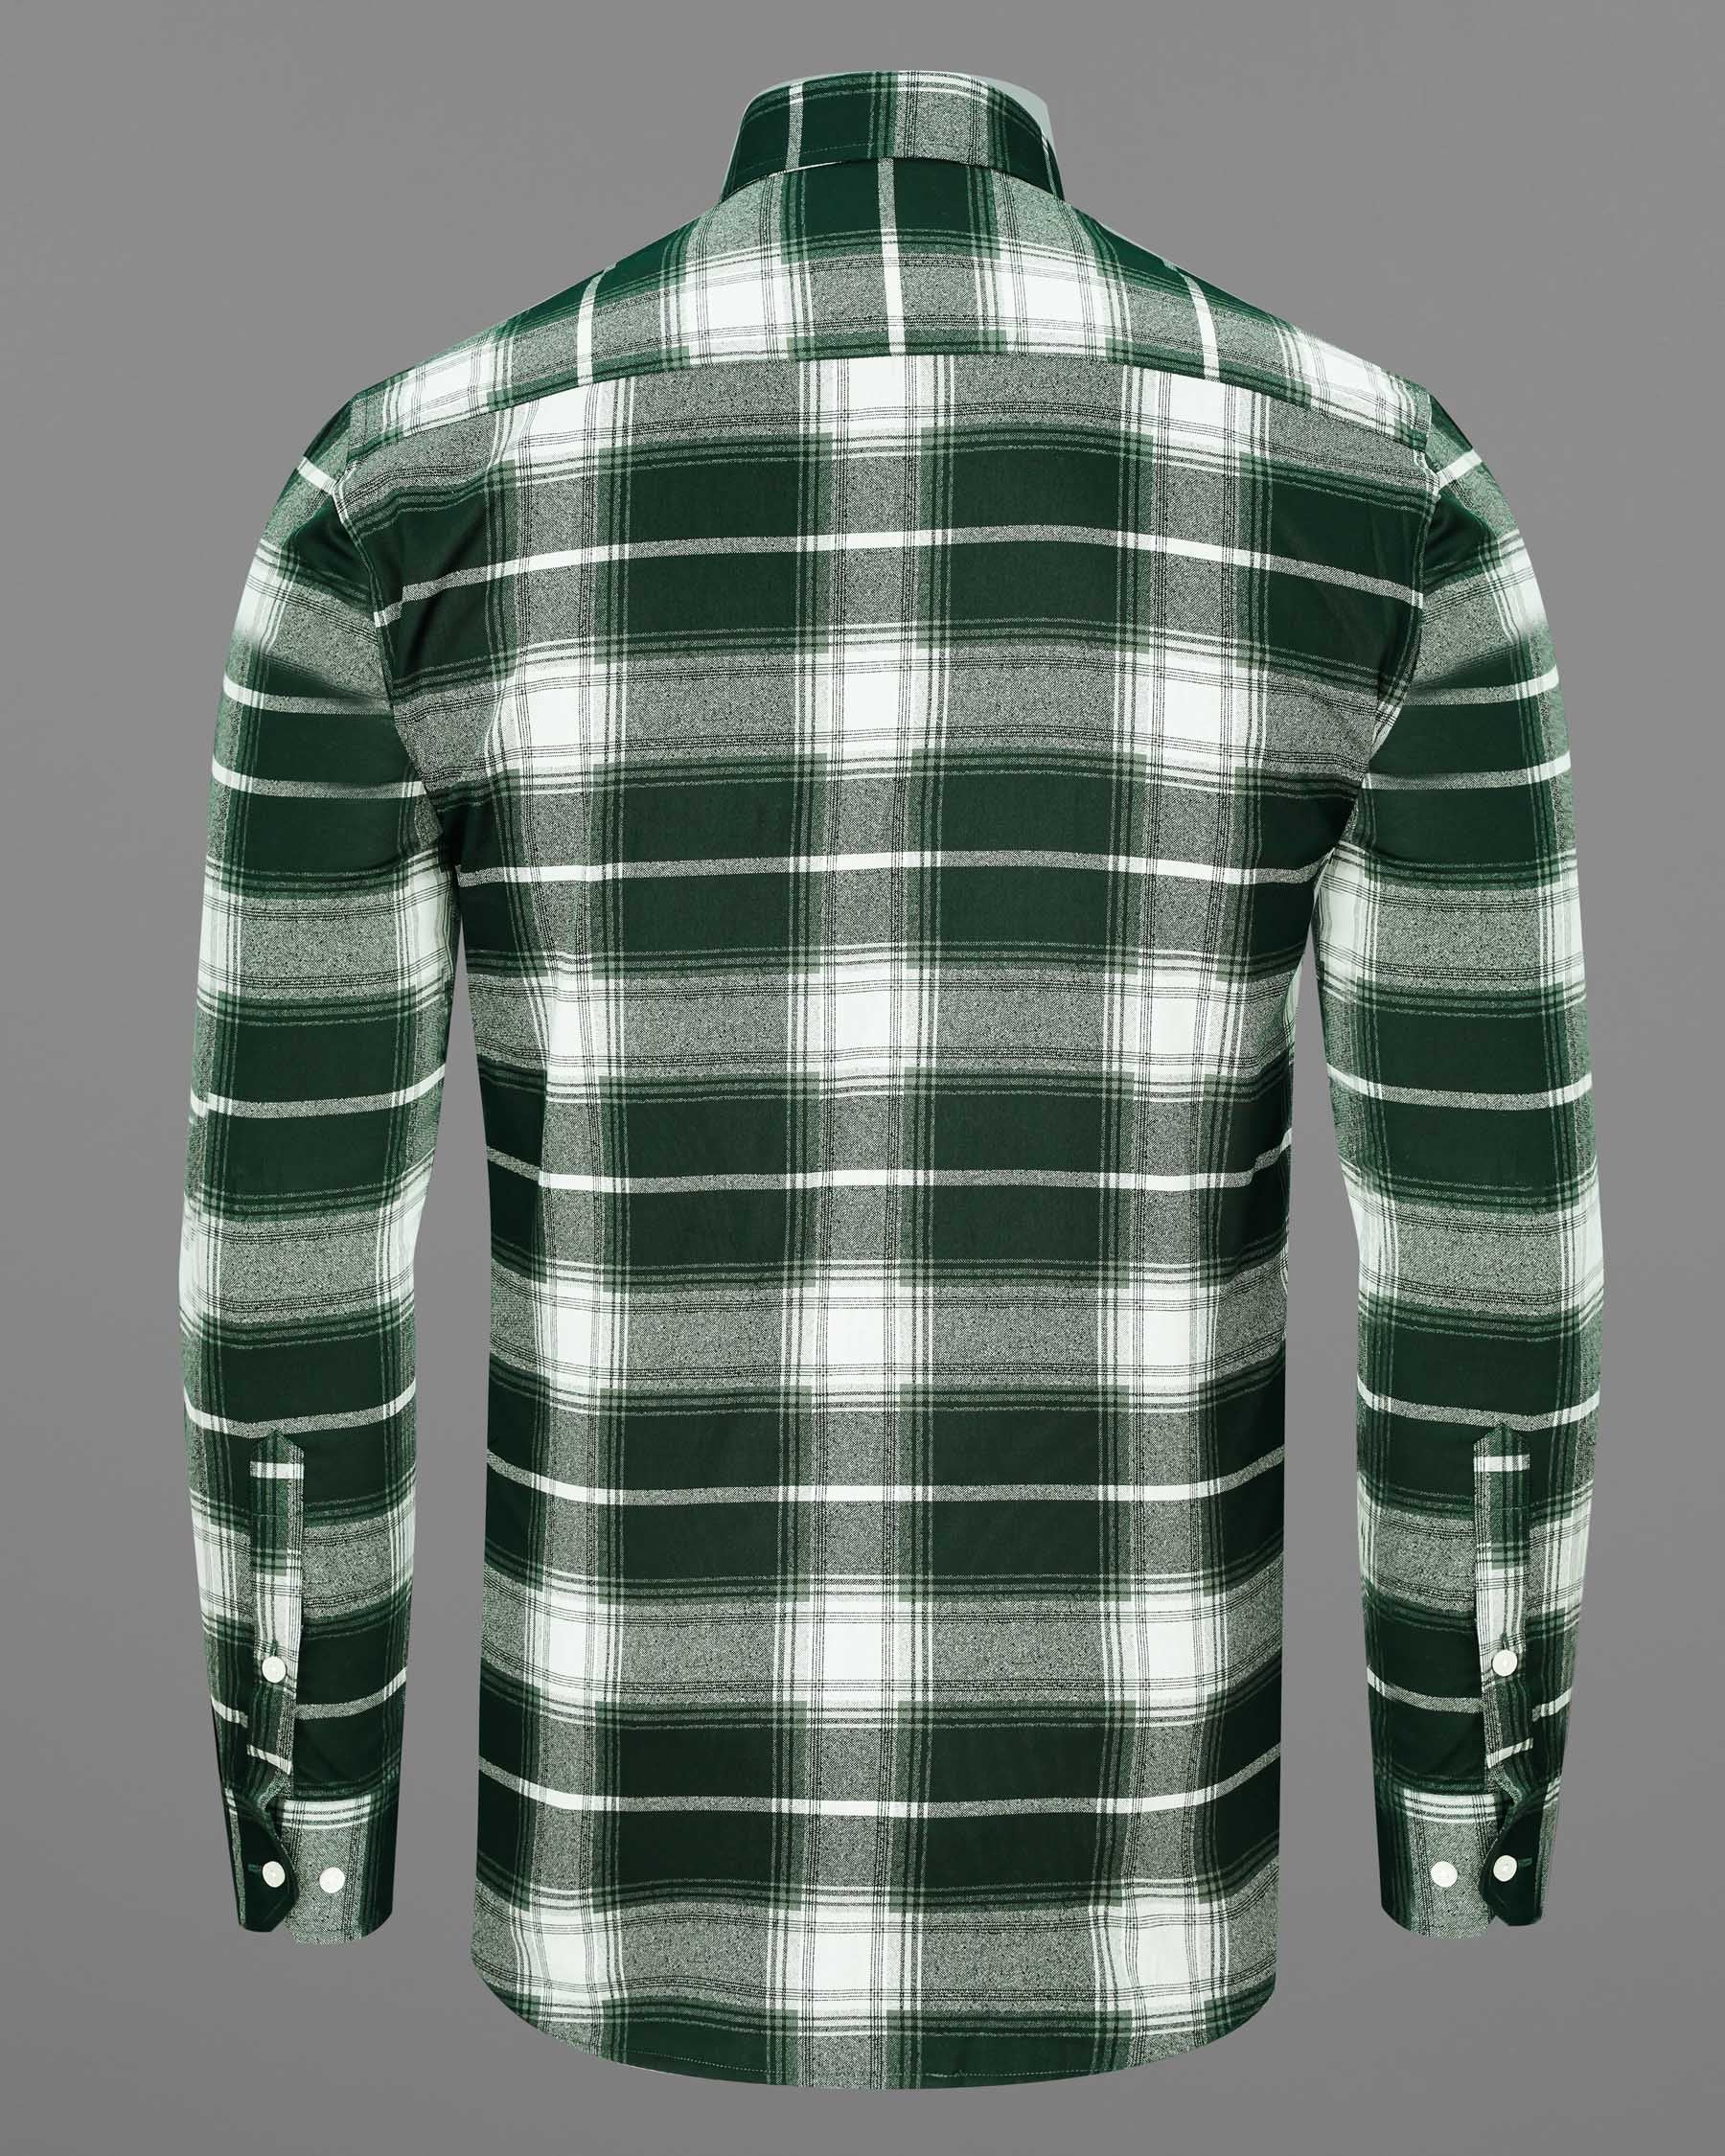 Timber Green with Bright White Twill Plaid Premium Cotton Shirt  7467-38, 7467-H-38, 7467-39, 7467-H-39, 7467-40, 7467-H-40, 7467-42, 7467-H-42, 7467-44, 7467-H-44, 7467-46, 7467-H-46, 7467-48, 7467-H-48, 7467-50, 7467-H-50, 7467-52, 7467-H-52